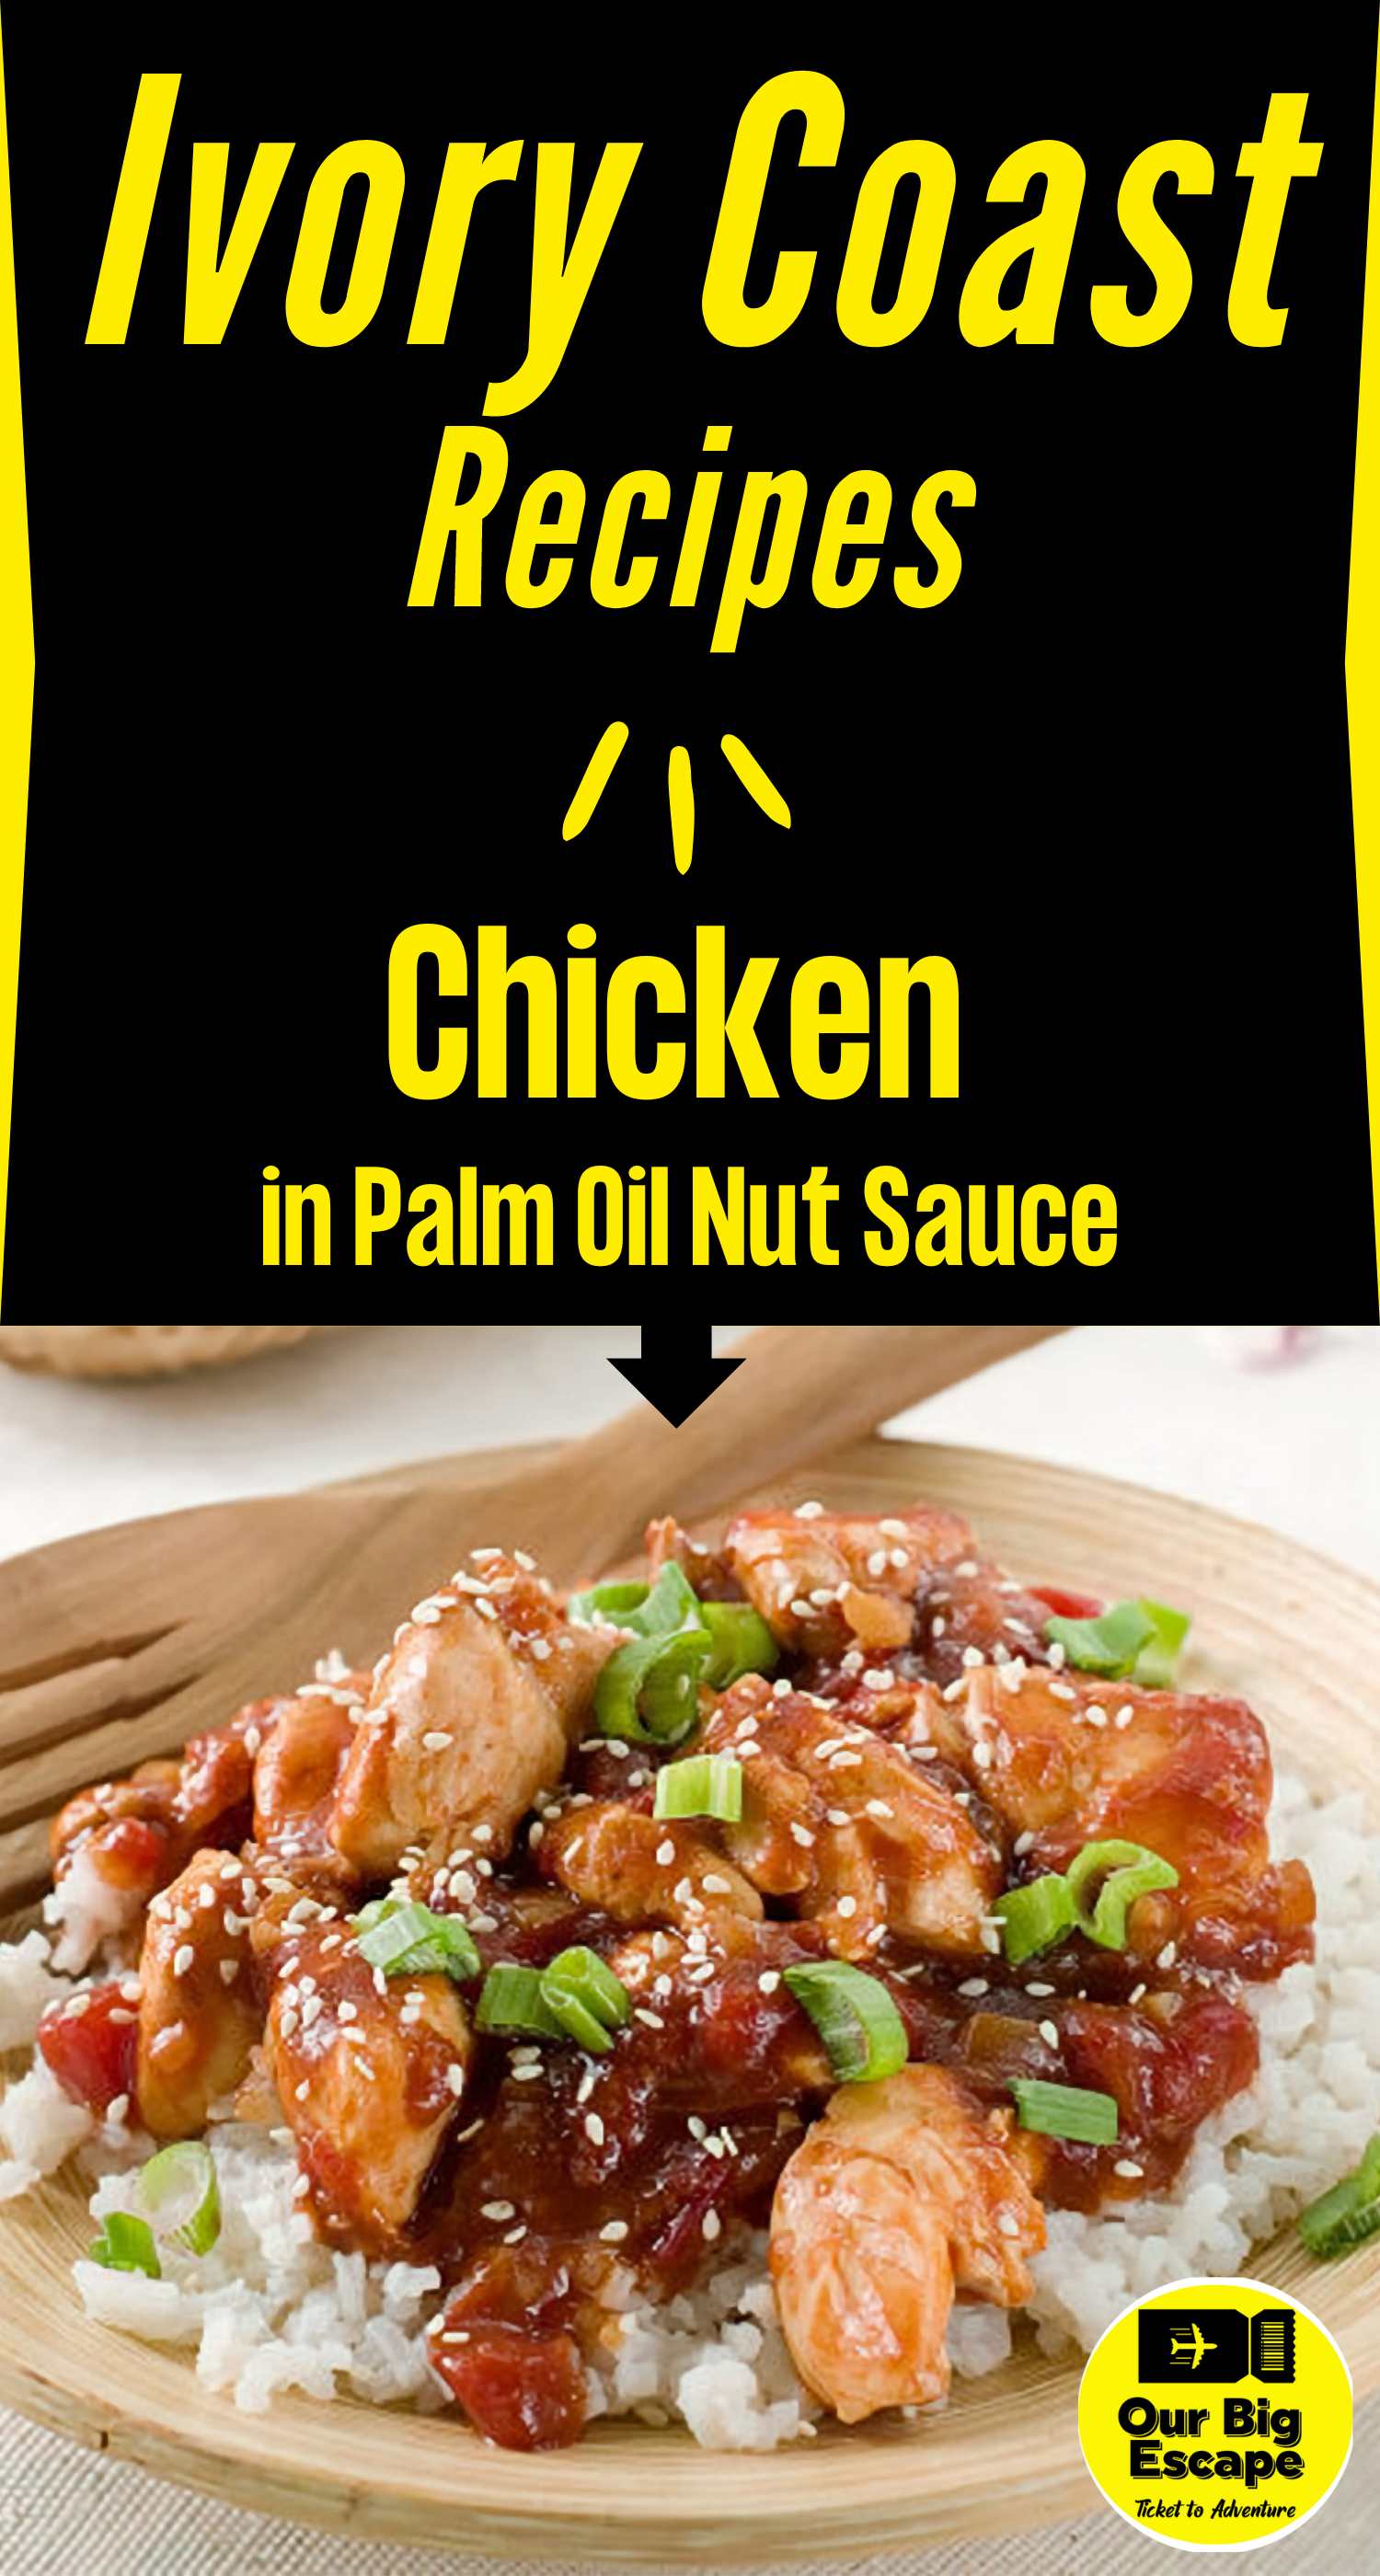 Ivory Coast Recipes - Chicken in Palm Oil Nut Sauce